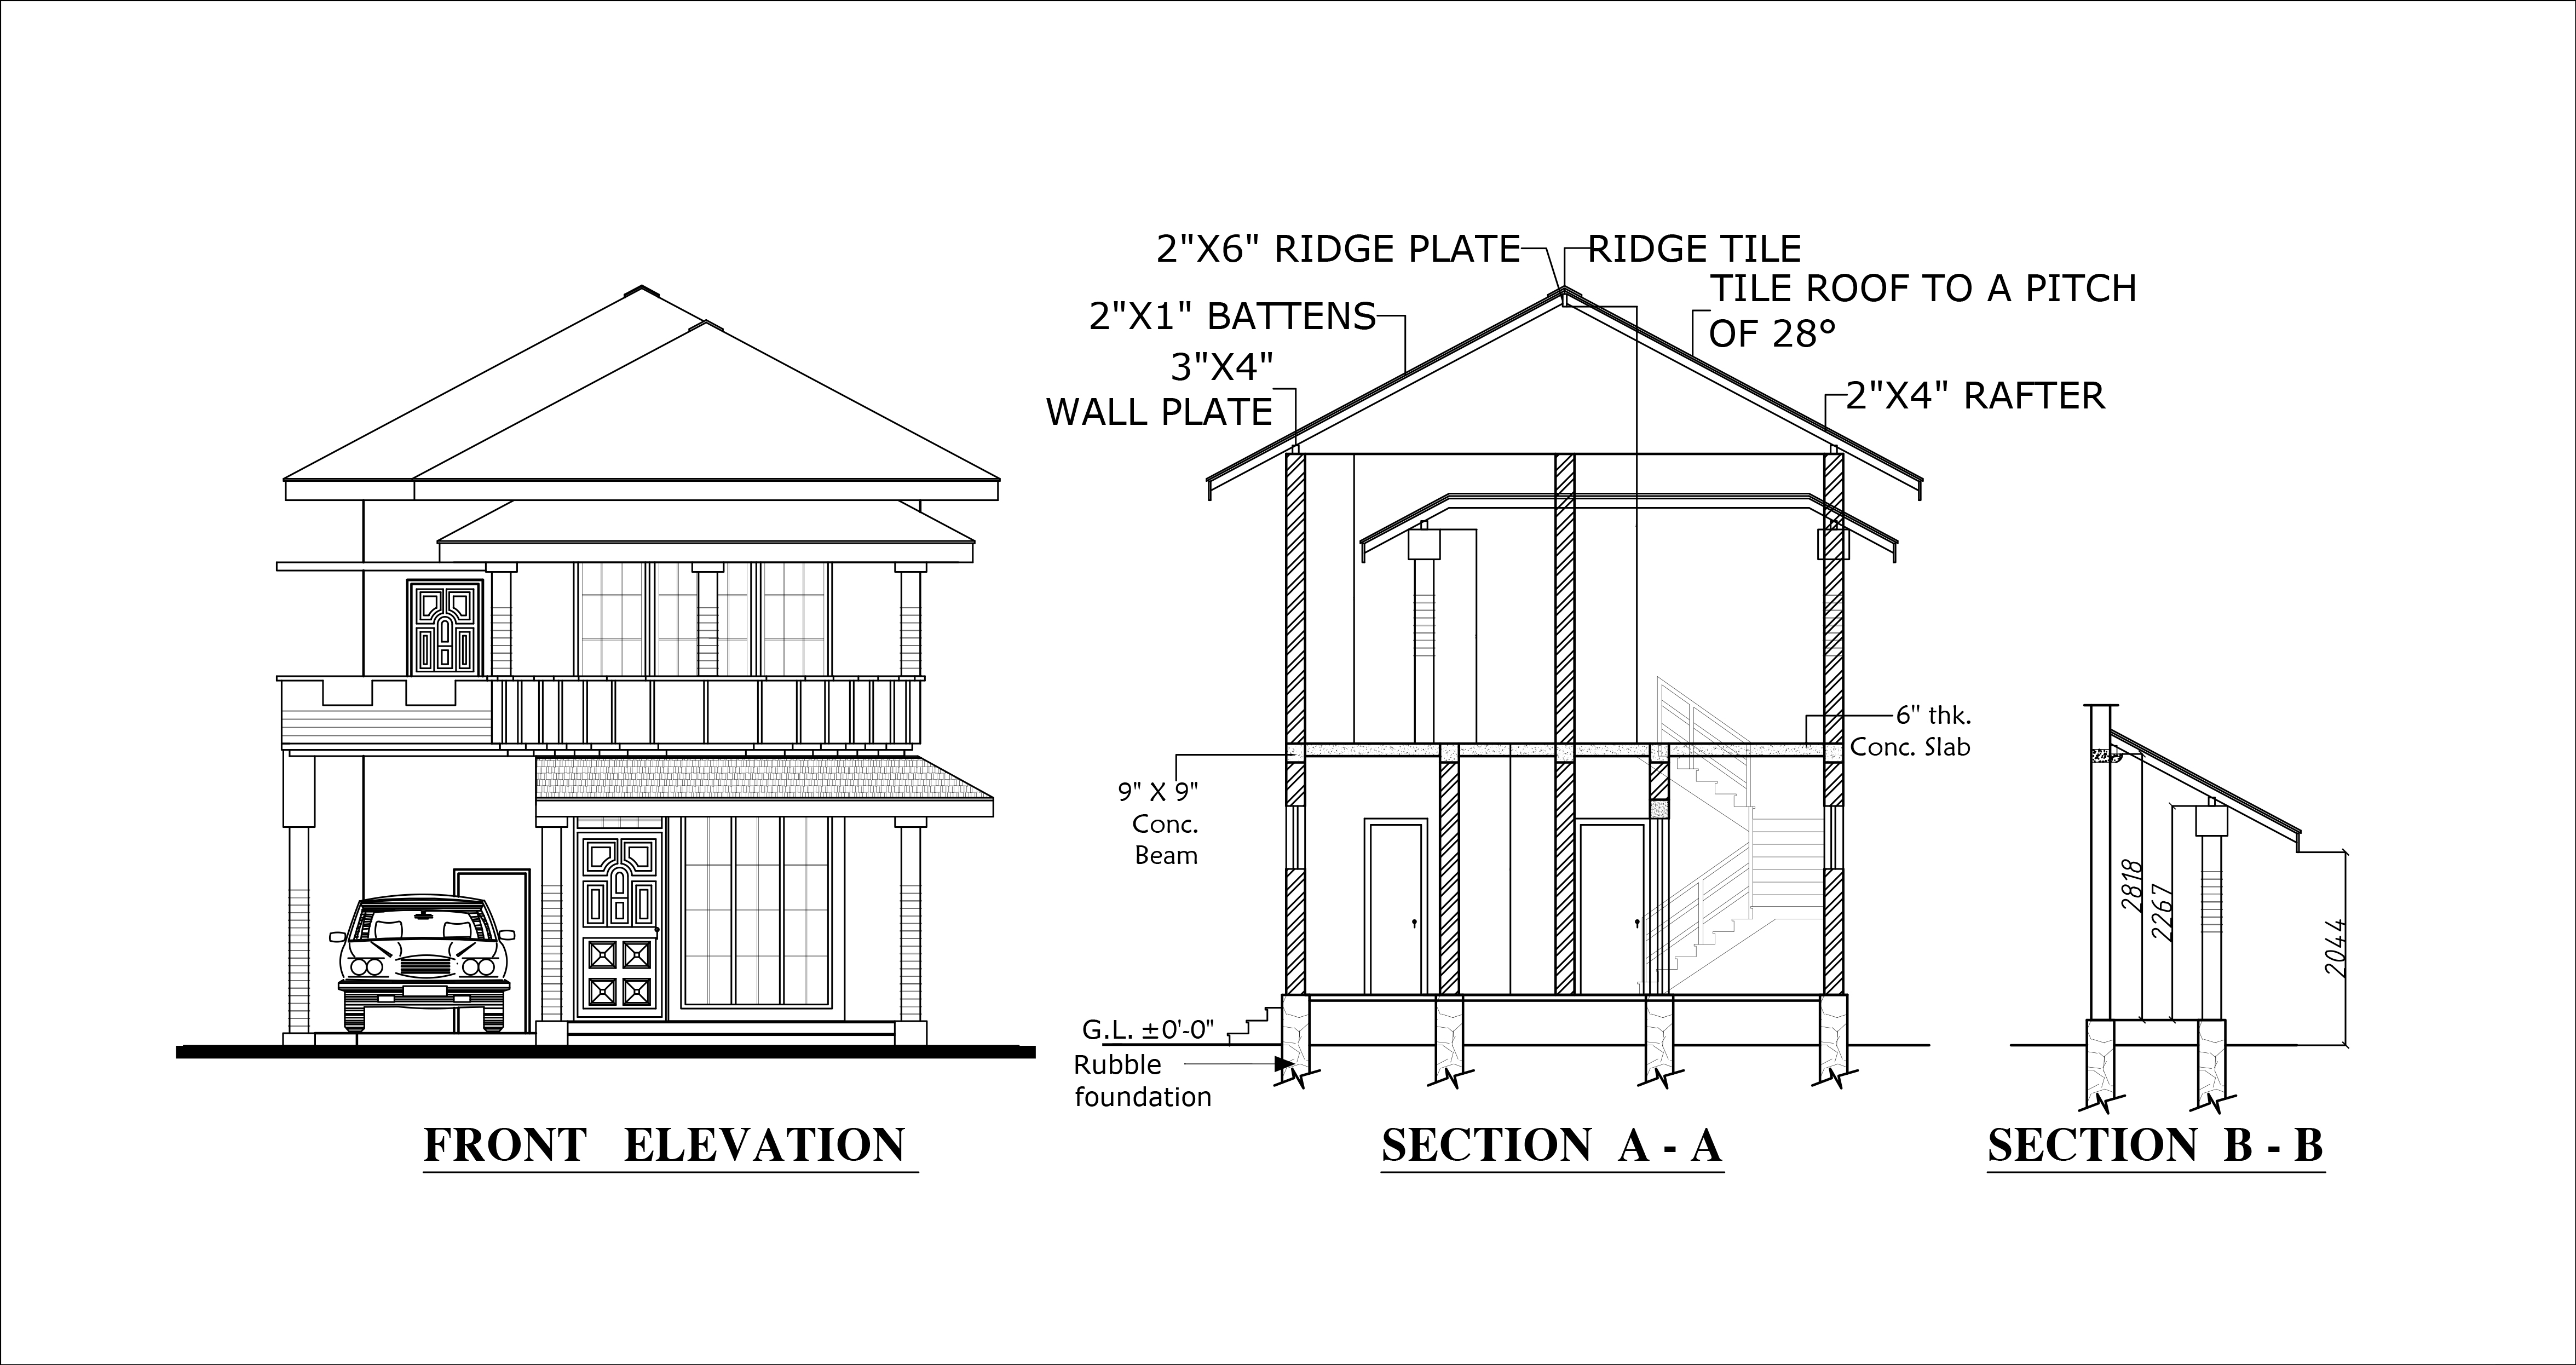 http://www.dwgnet.com/wp-content/uploads/2016/07/House-plan-front-elevation-and-section.jpg